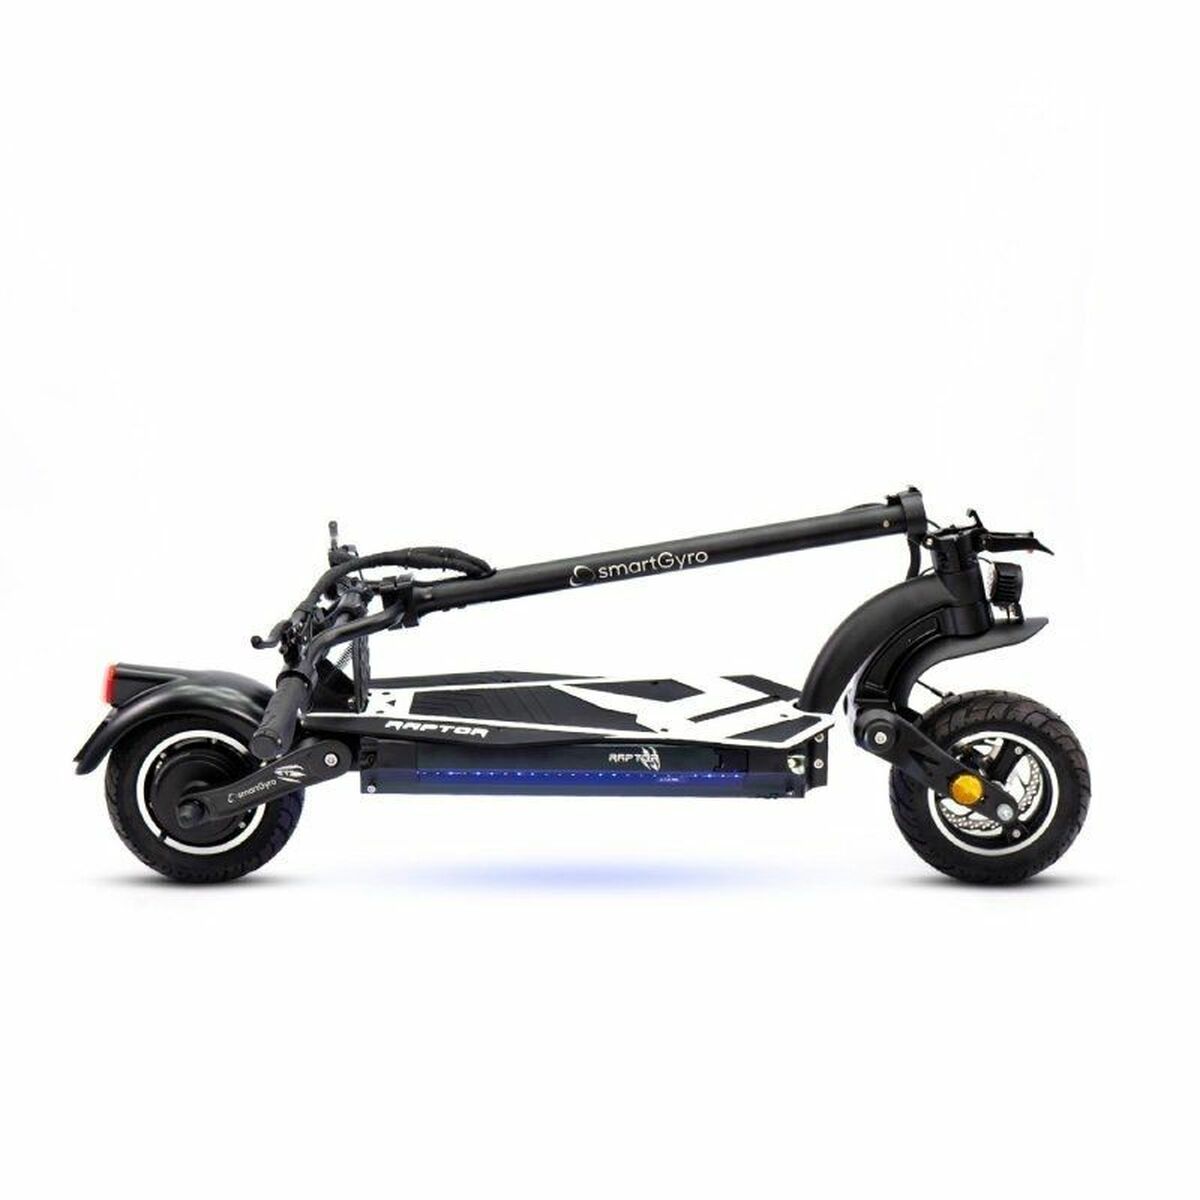 Electric Scooter Smartgyro SG27-429 25 km/h, Smartgyro, Sports and outdoors, Urban mobility, electric-scooter-smartgyro-sg27-429-25-km-h, Brand_Smartgyro, category-reference-2609, category-reference-2629, category-reference-2904, category-reference-t-19681, category-reference-t-19756, category-reference-t-19876, category-reference-t-21245, category-reference-t-25387, Condition_NEW, deportista / en forma, Price_+ 1000, RiotNook